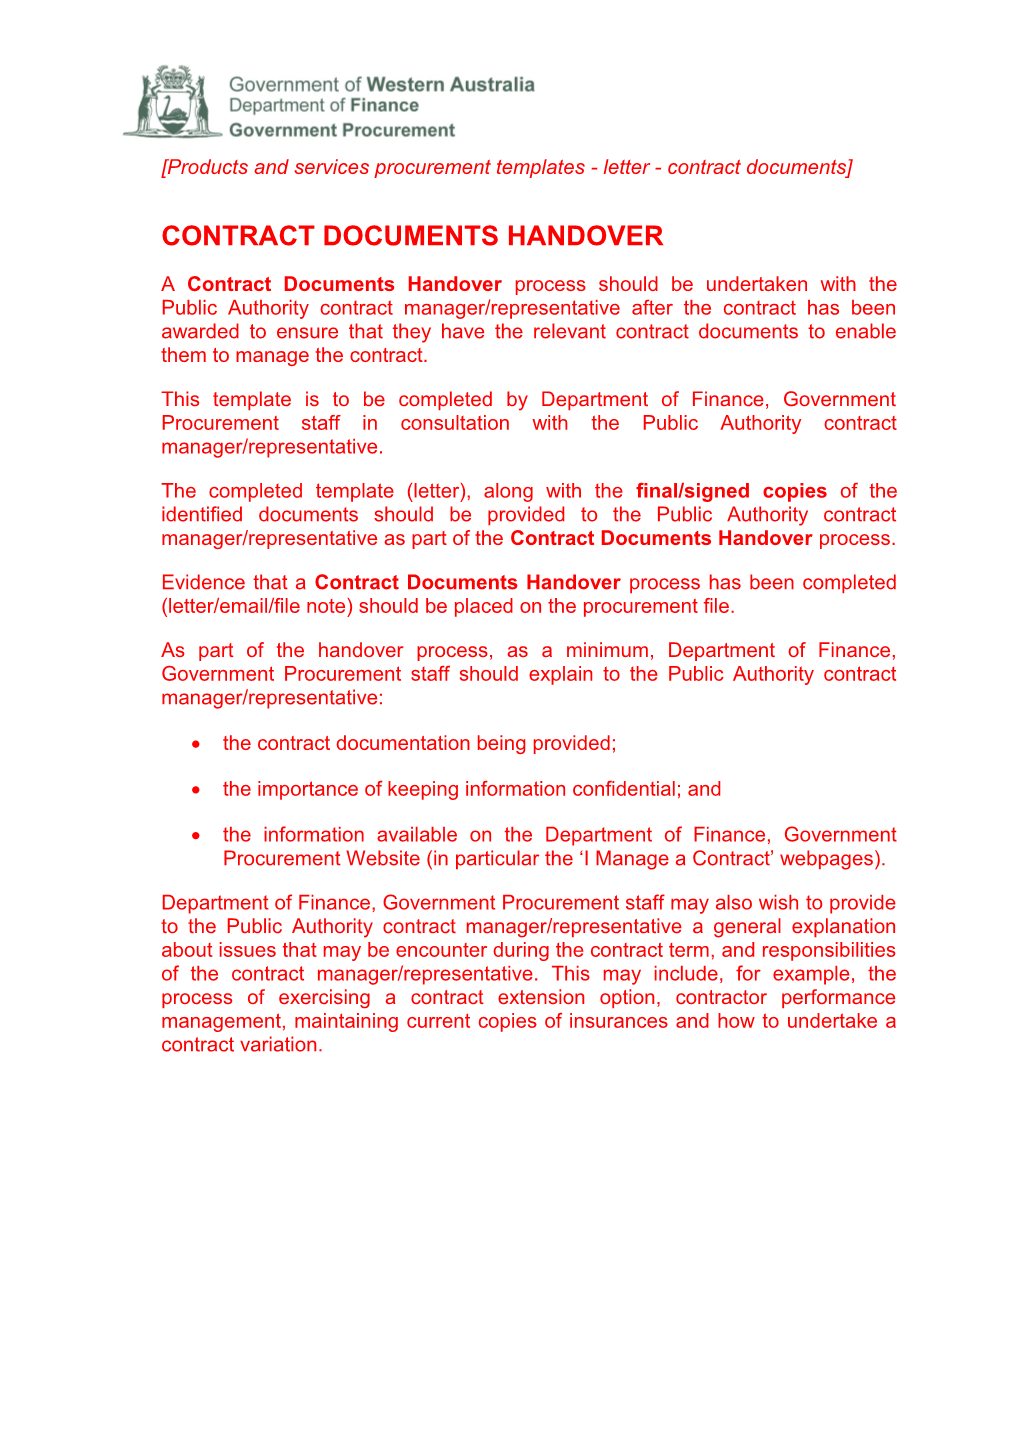 Letter - Contract Documents